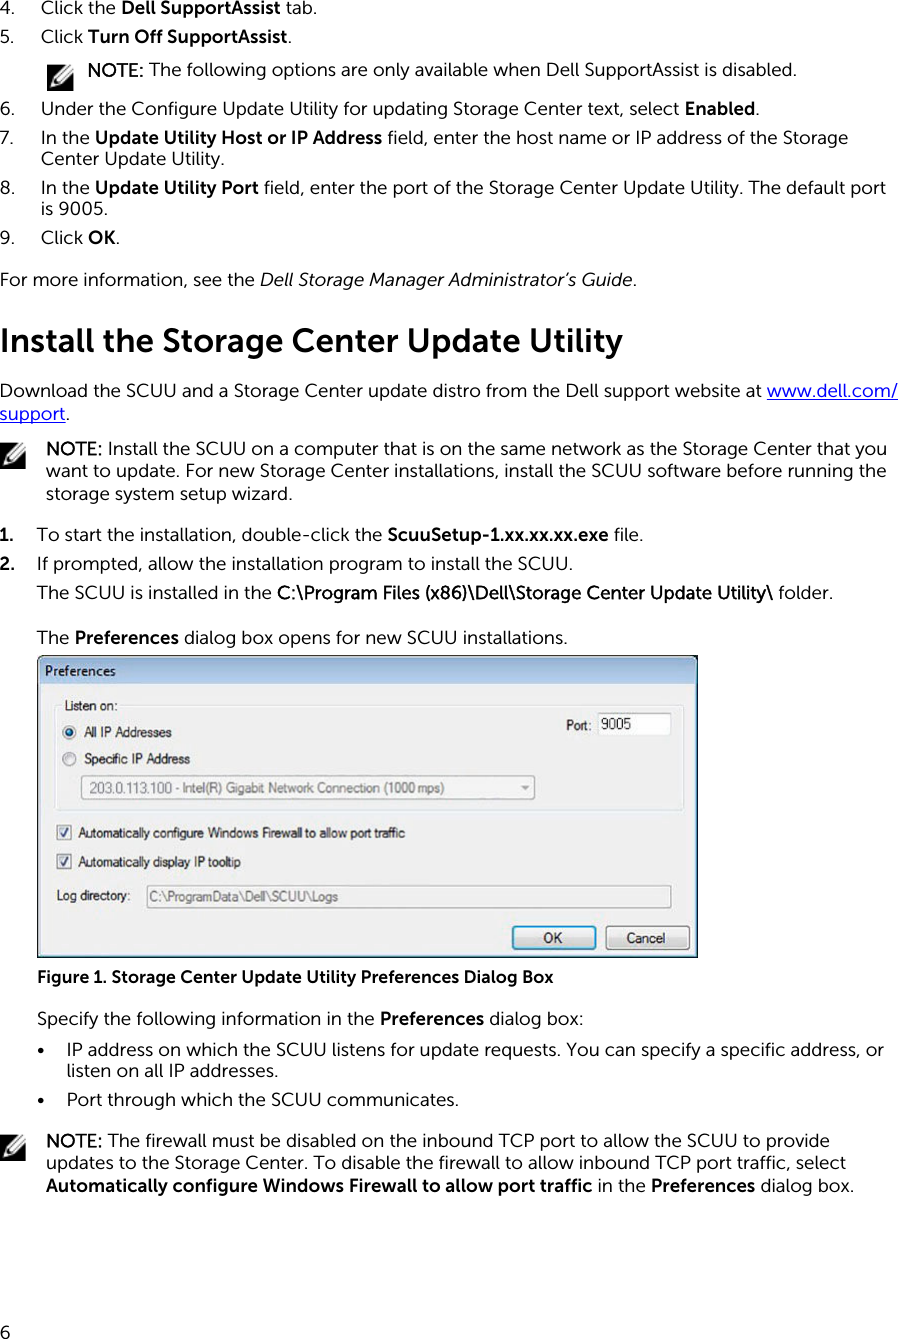 Page 6 of 7 - Dell Dell-compellent-sc4020 Storage Center OS Version 7 Update Utility Administrator’s Guide User Manual  - Administrator Guide9 En-us